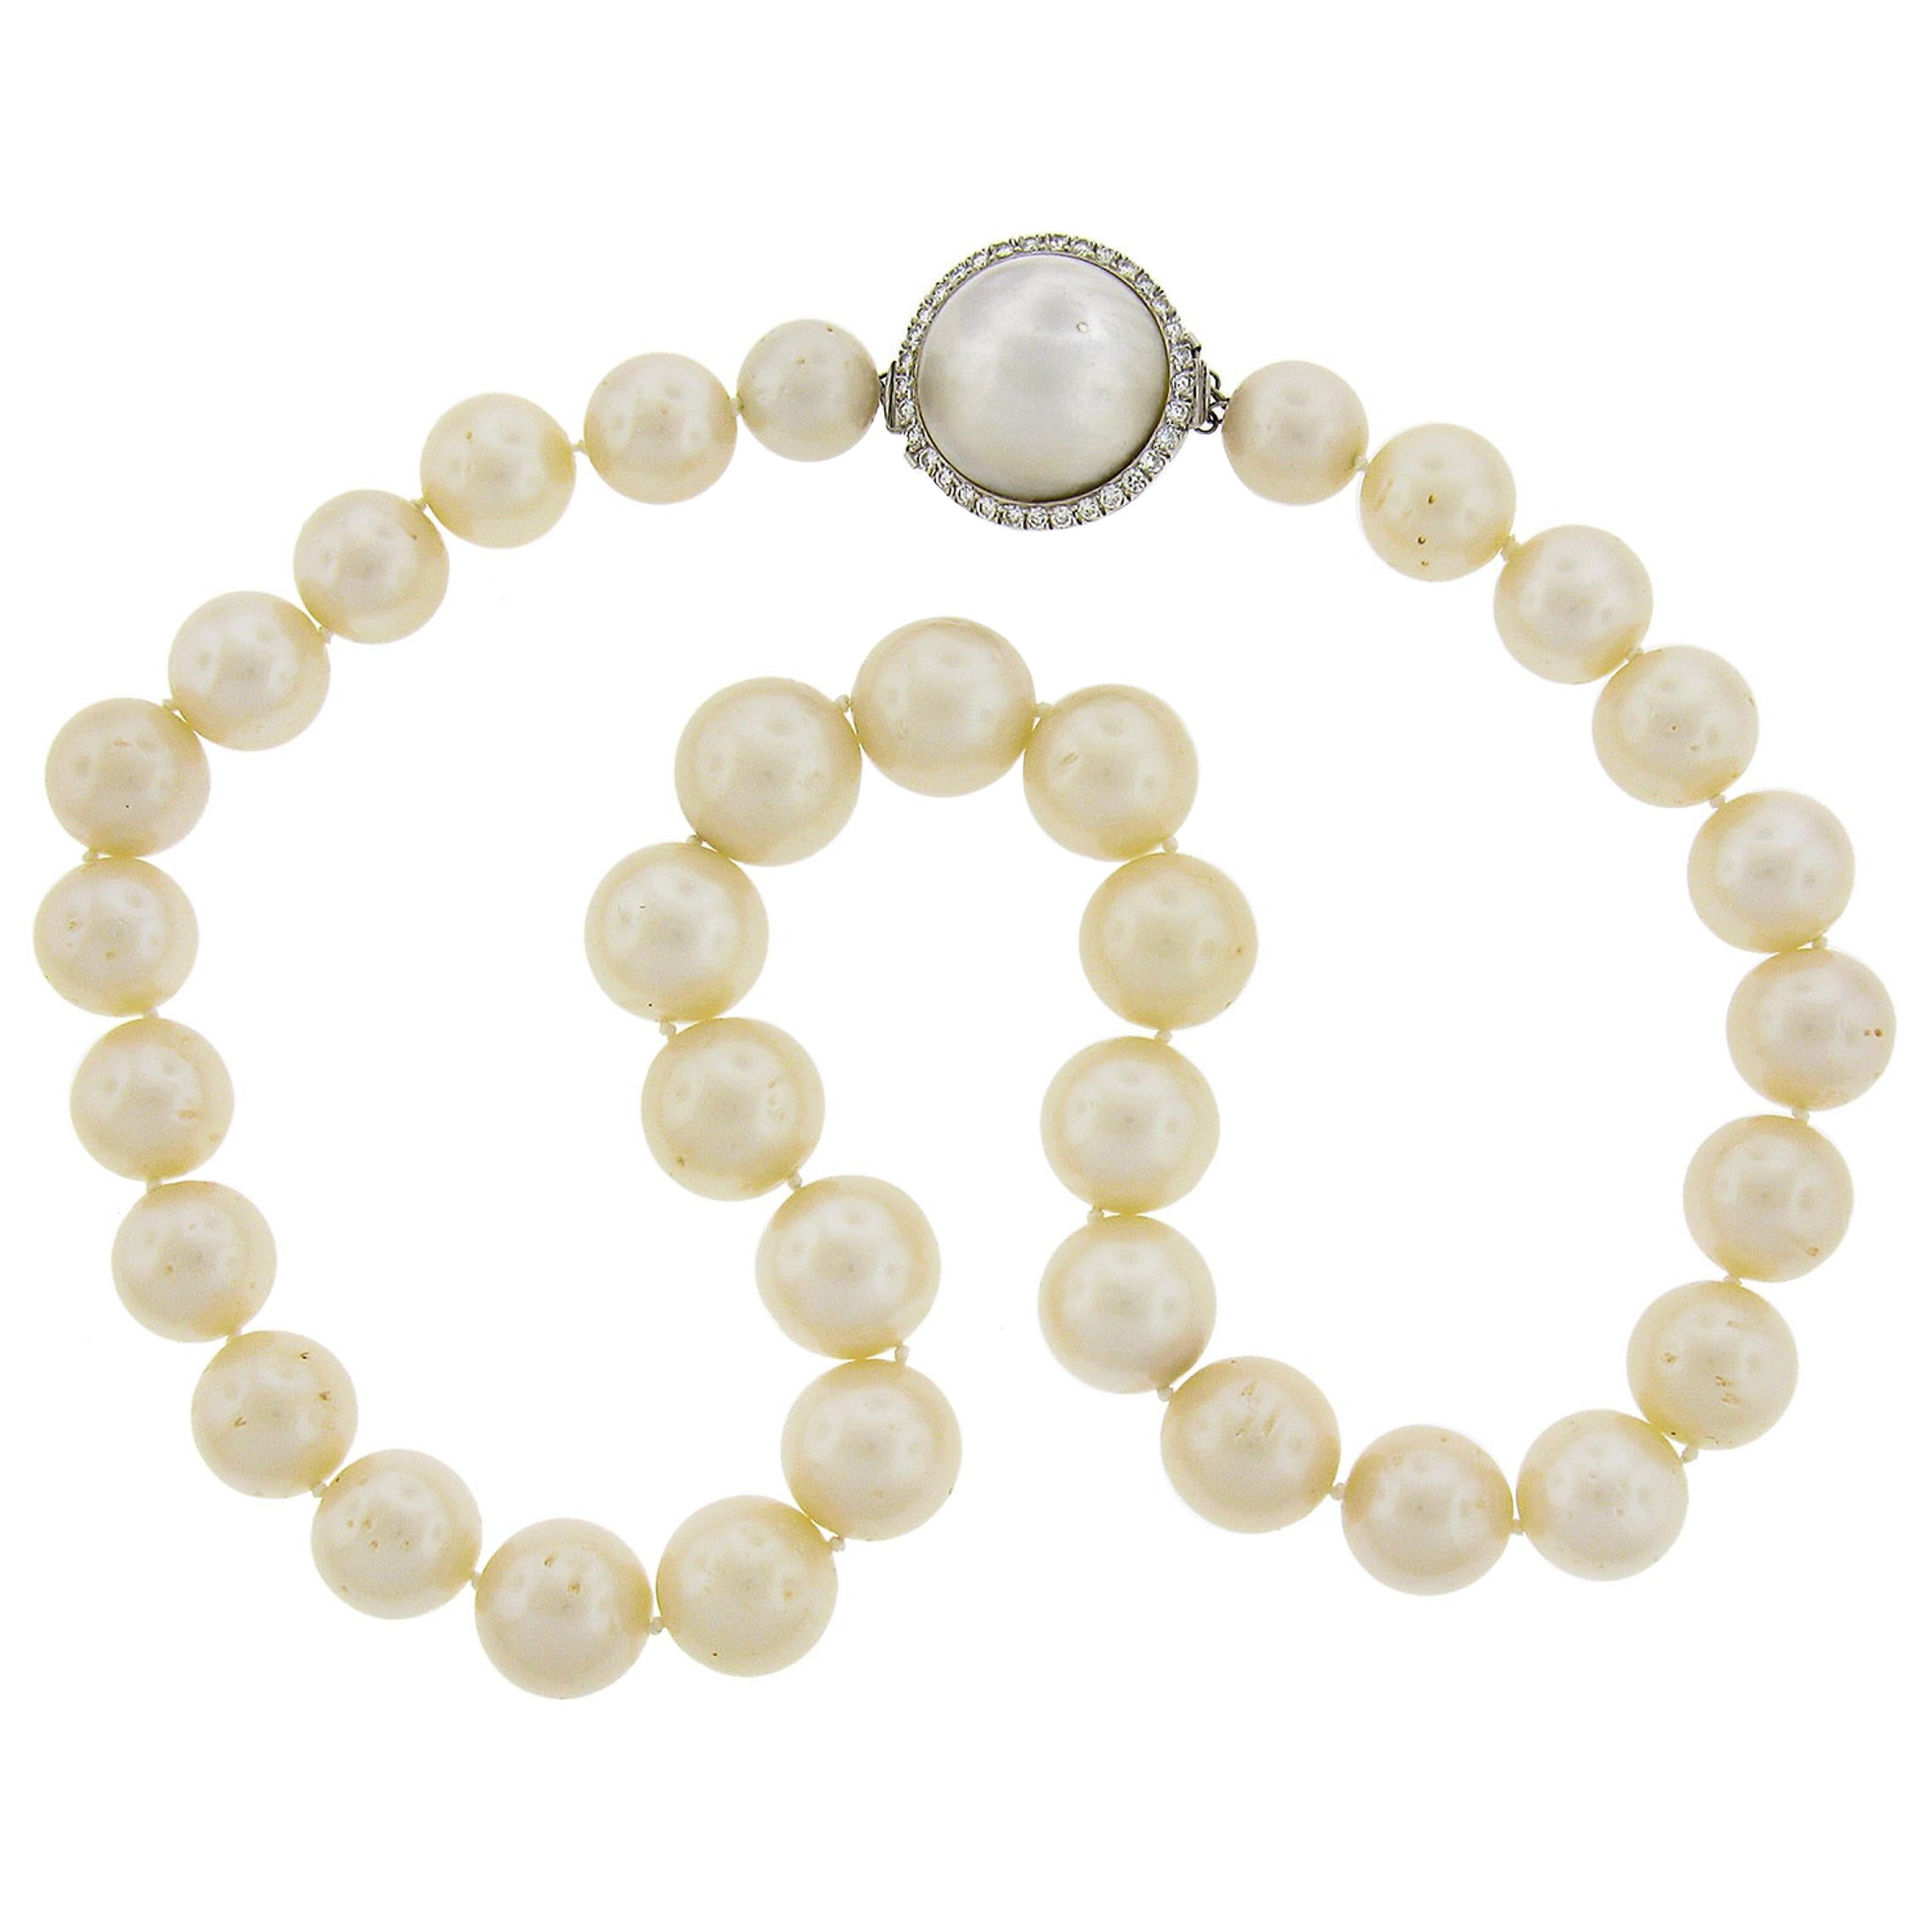 20" GIA Cultured Pearl Strand Necklace w/ 14k Gold Diamond & Mabe Pearl Clasp For Sale